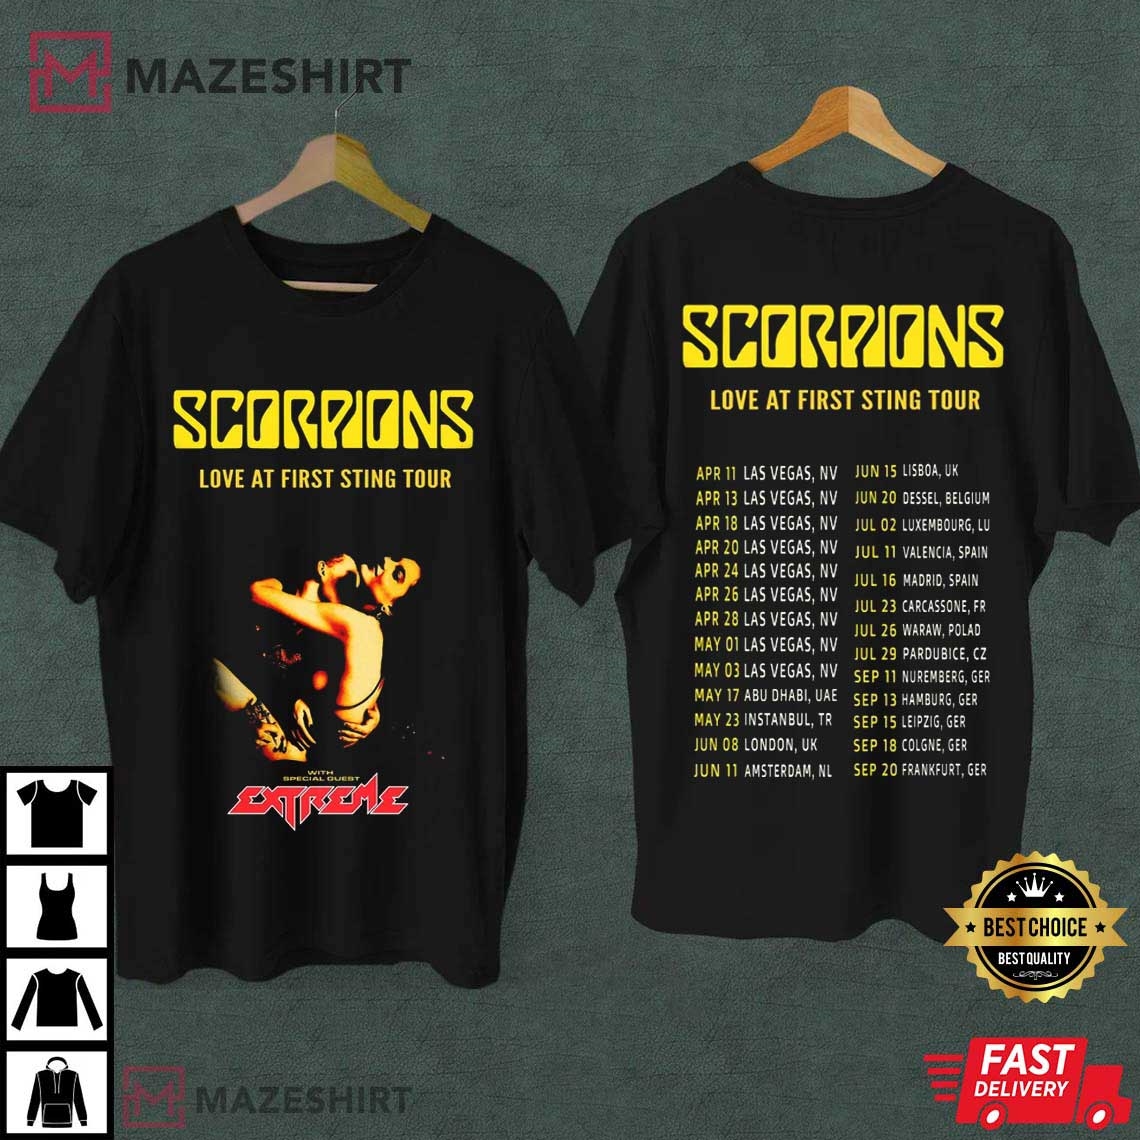 Scorpions Love at First Sting Tour 2024 T-Shirt #Scorpions #LoveatFirstSting #mazeshirt mazeshirt.com/product/scorpi…